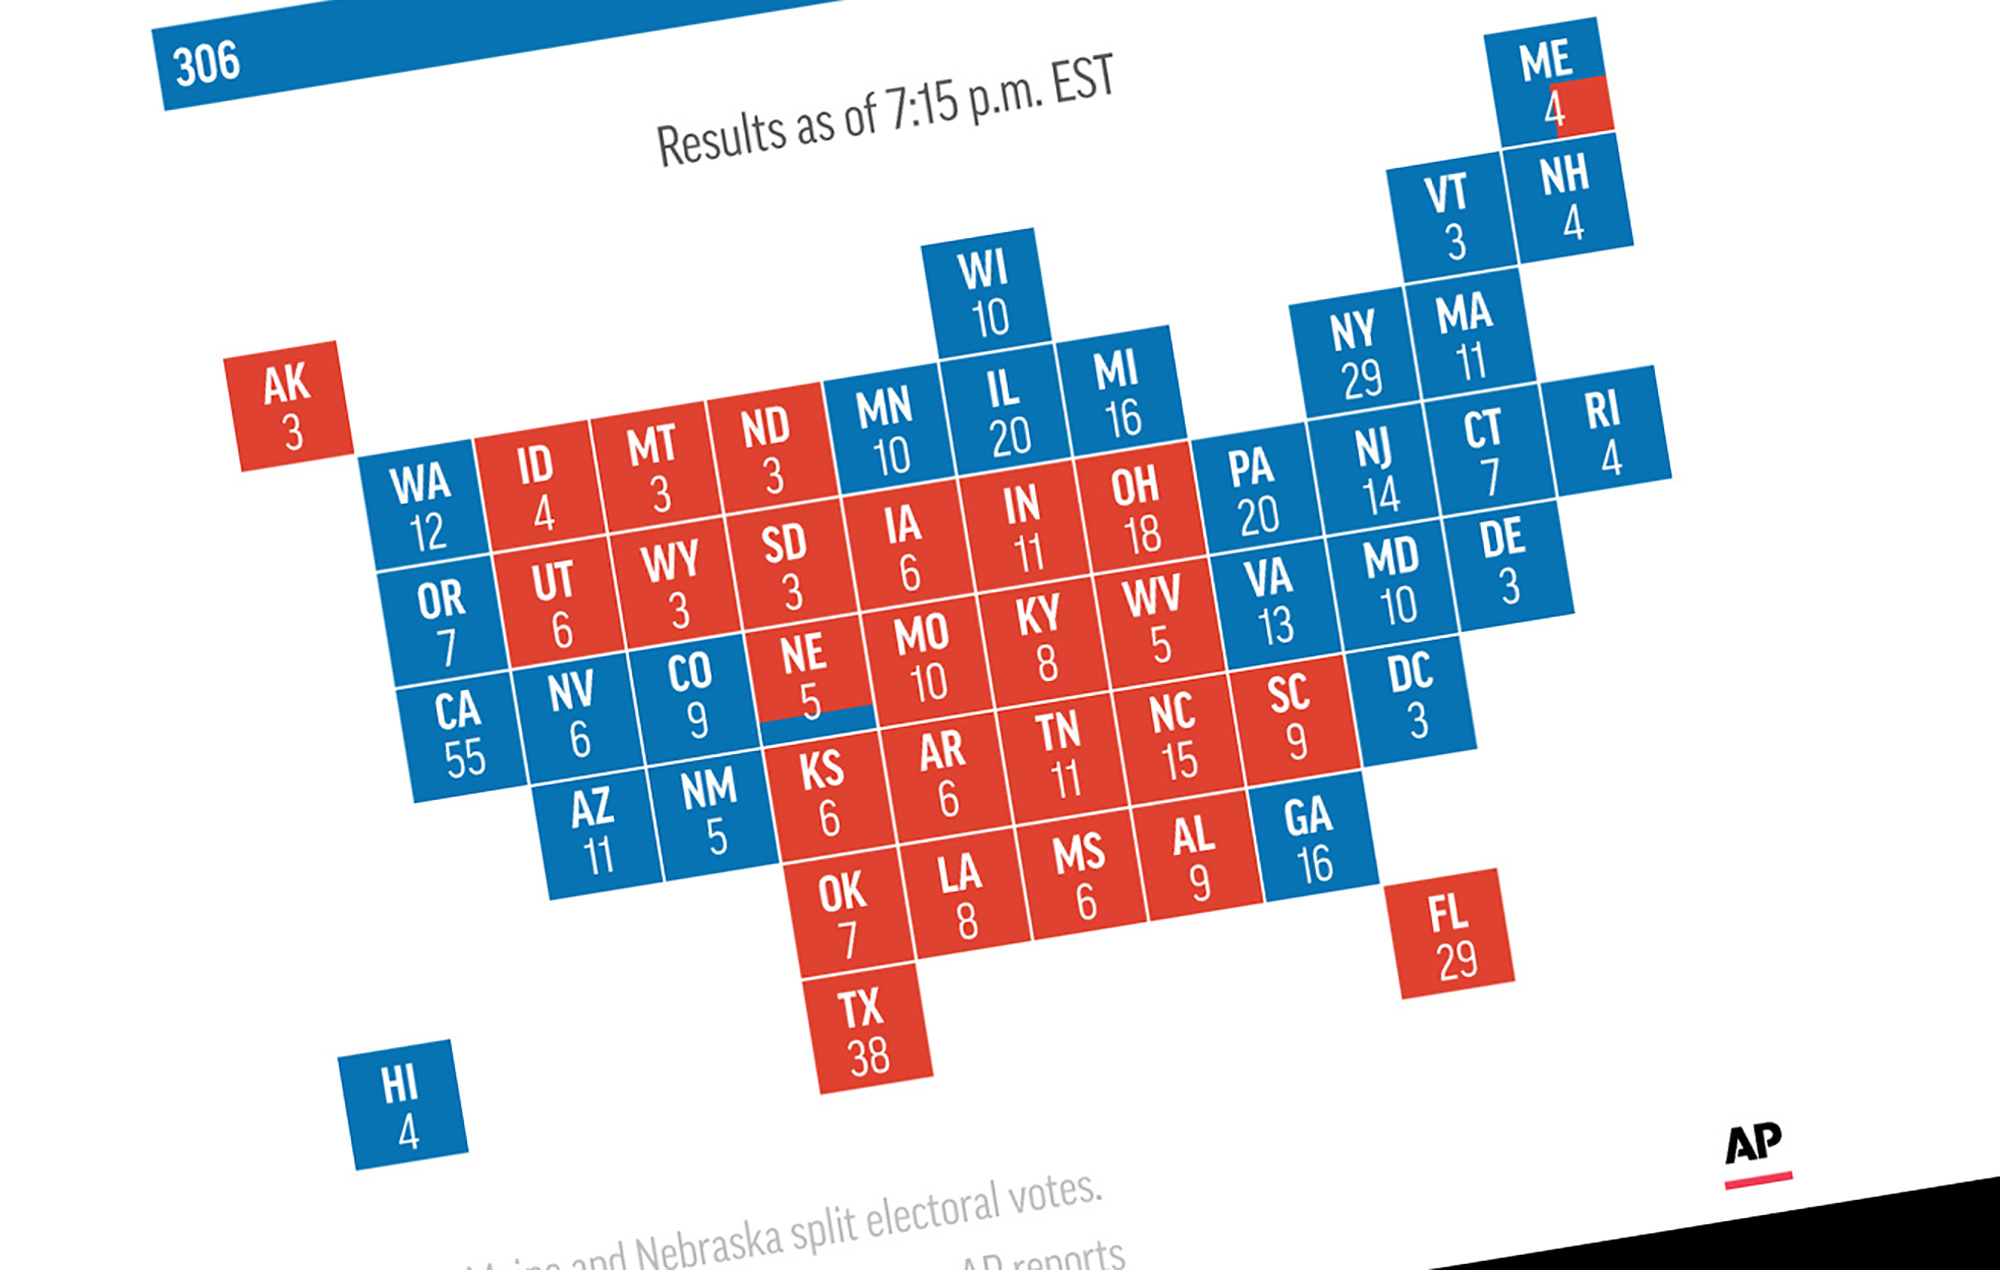 PHOTO: A map released by the Associated Press shows the Electoral College vote count as of 7:15 p.m. EST on Dec. 14, 2020. The map has been rotated and cropped by ABC.